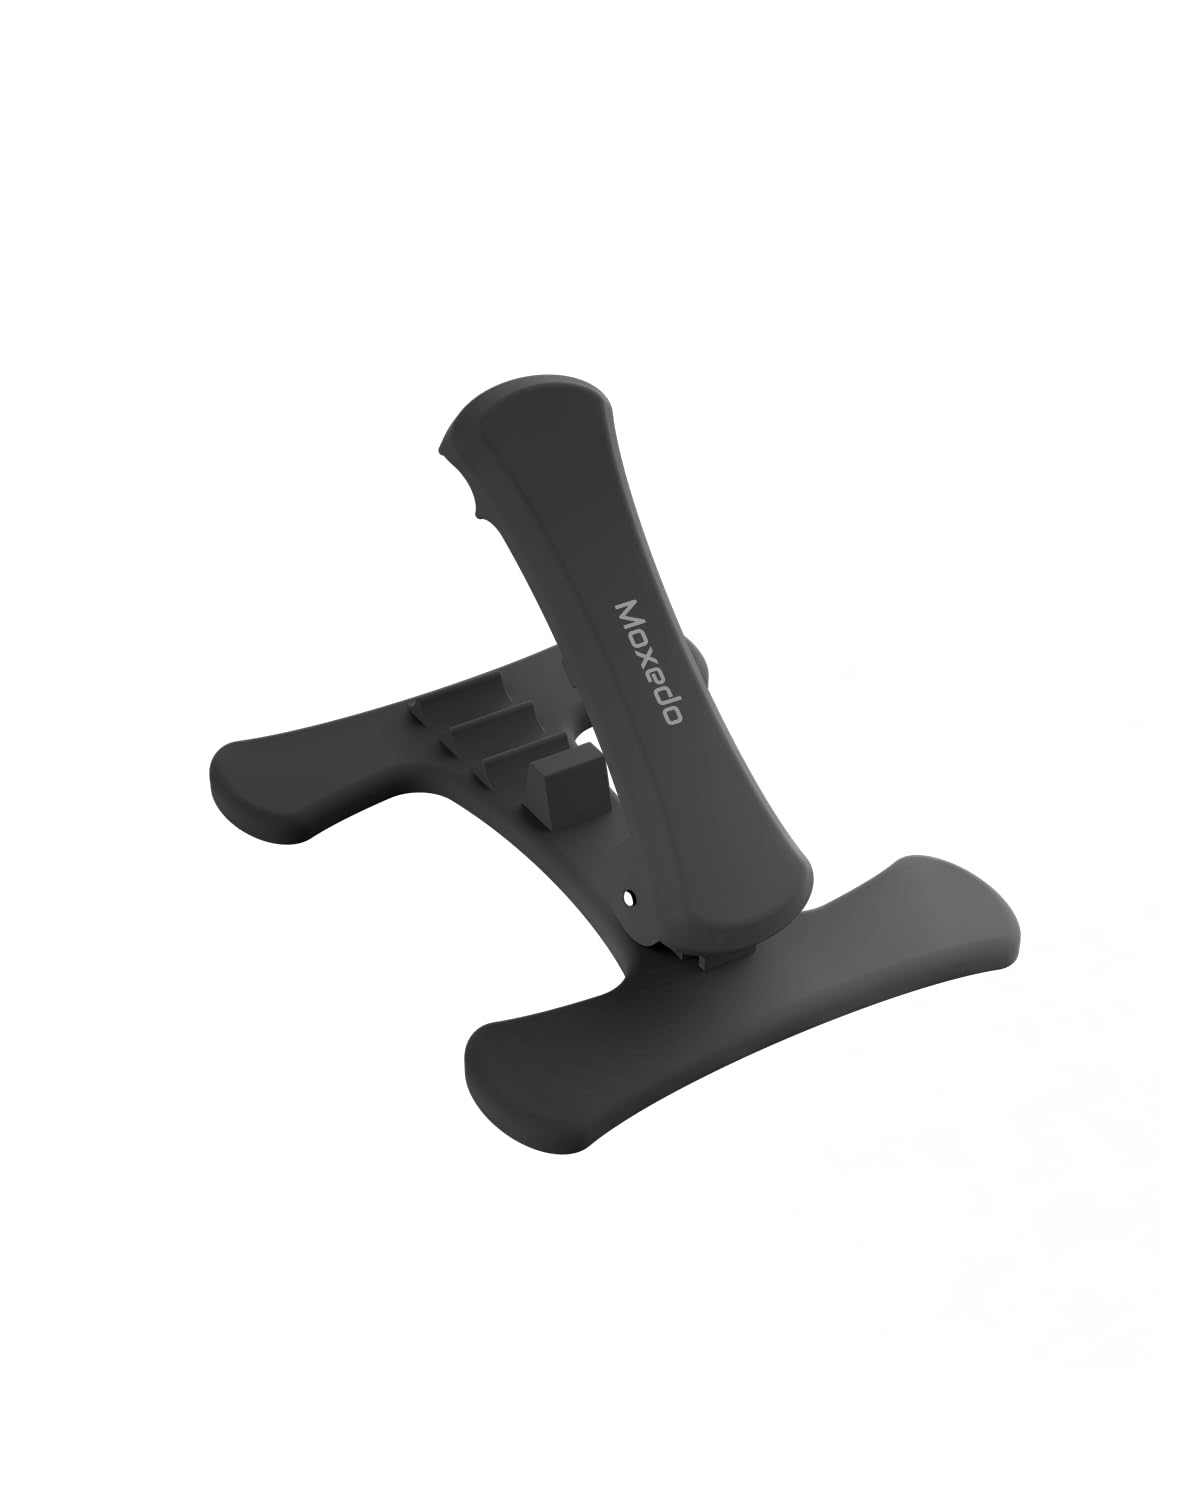 Moxedo Universal Car Phone Holder Bendable Phone Mount Suitable for Various Dashboard for Curved and Flat Surface - Black